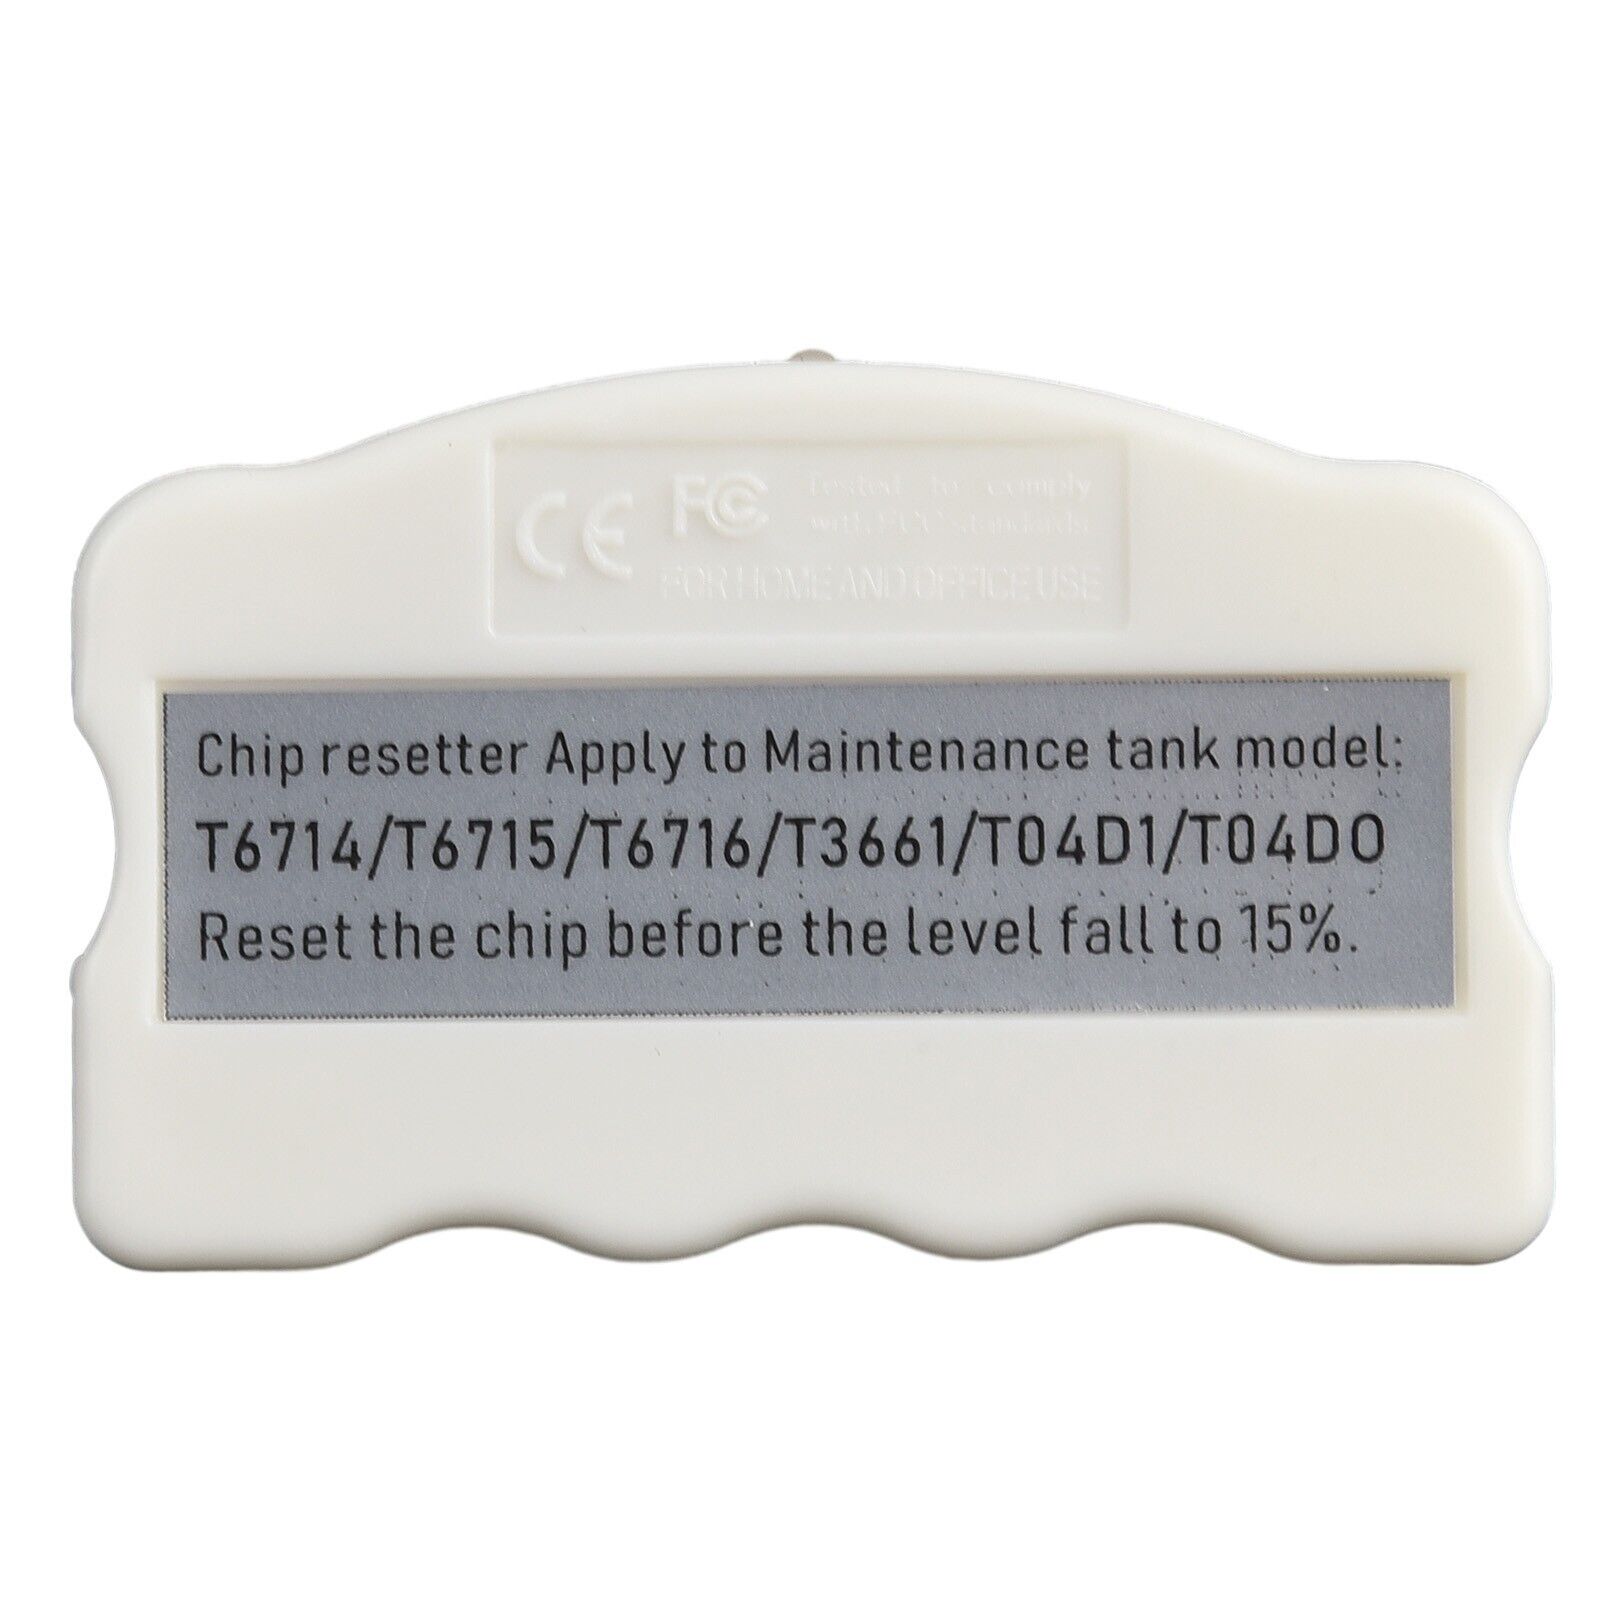 T3661 Waste Maintenance Tank Chip Resetter For XP-6001,XP-6000 XP-6100 Useful